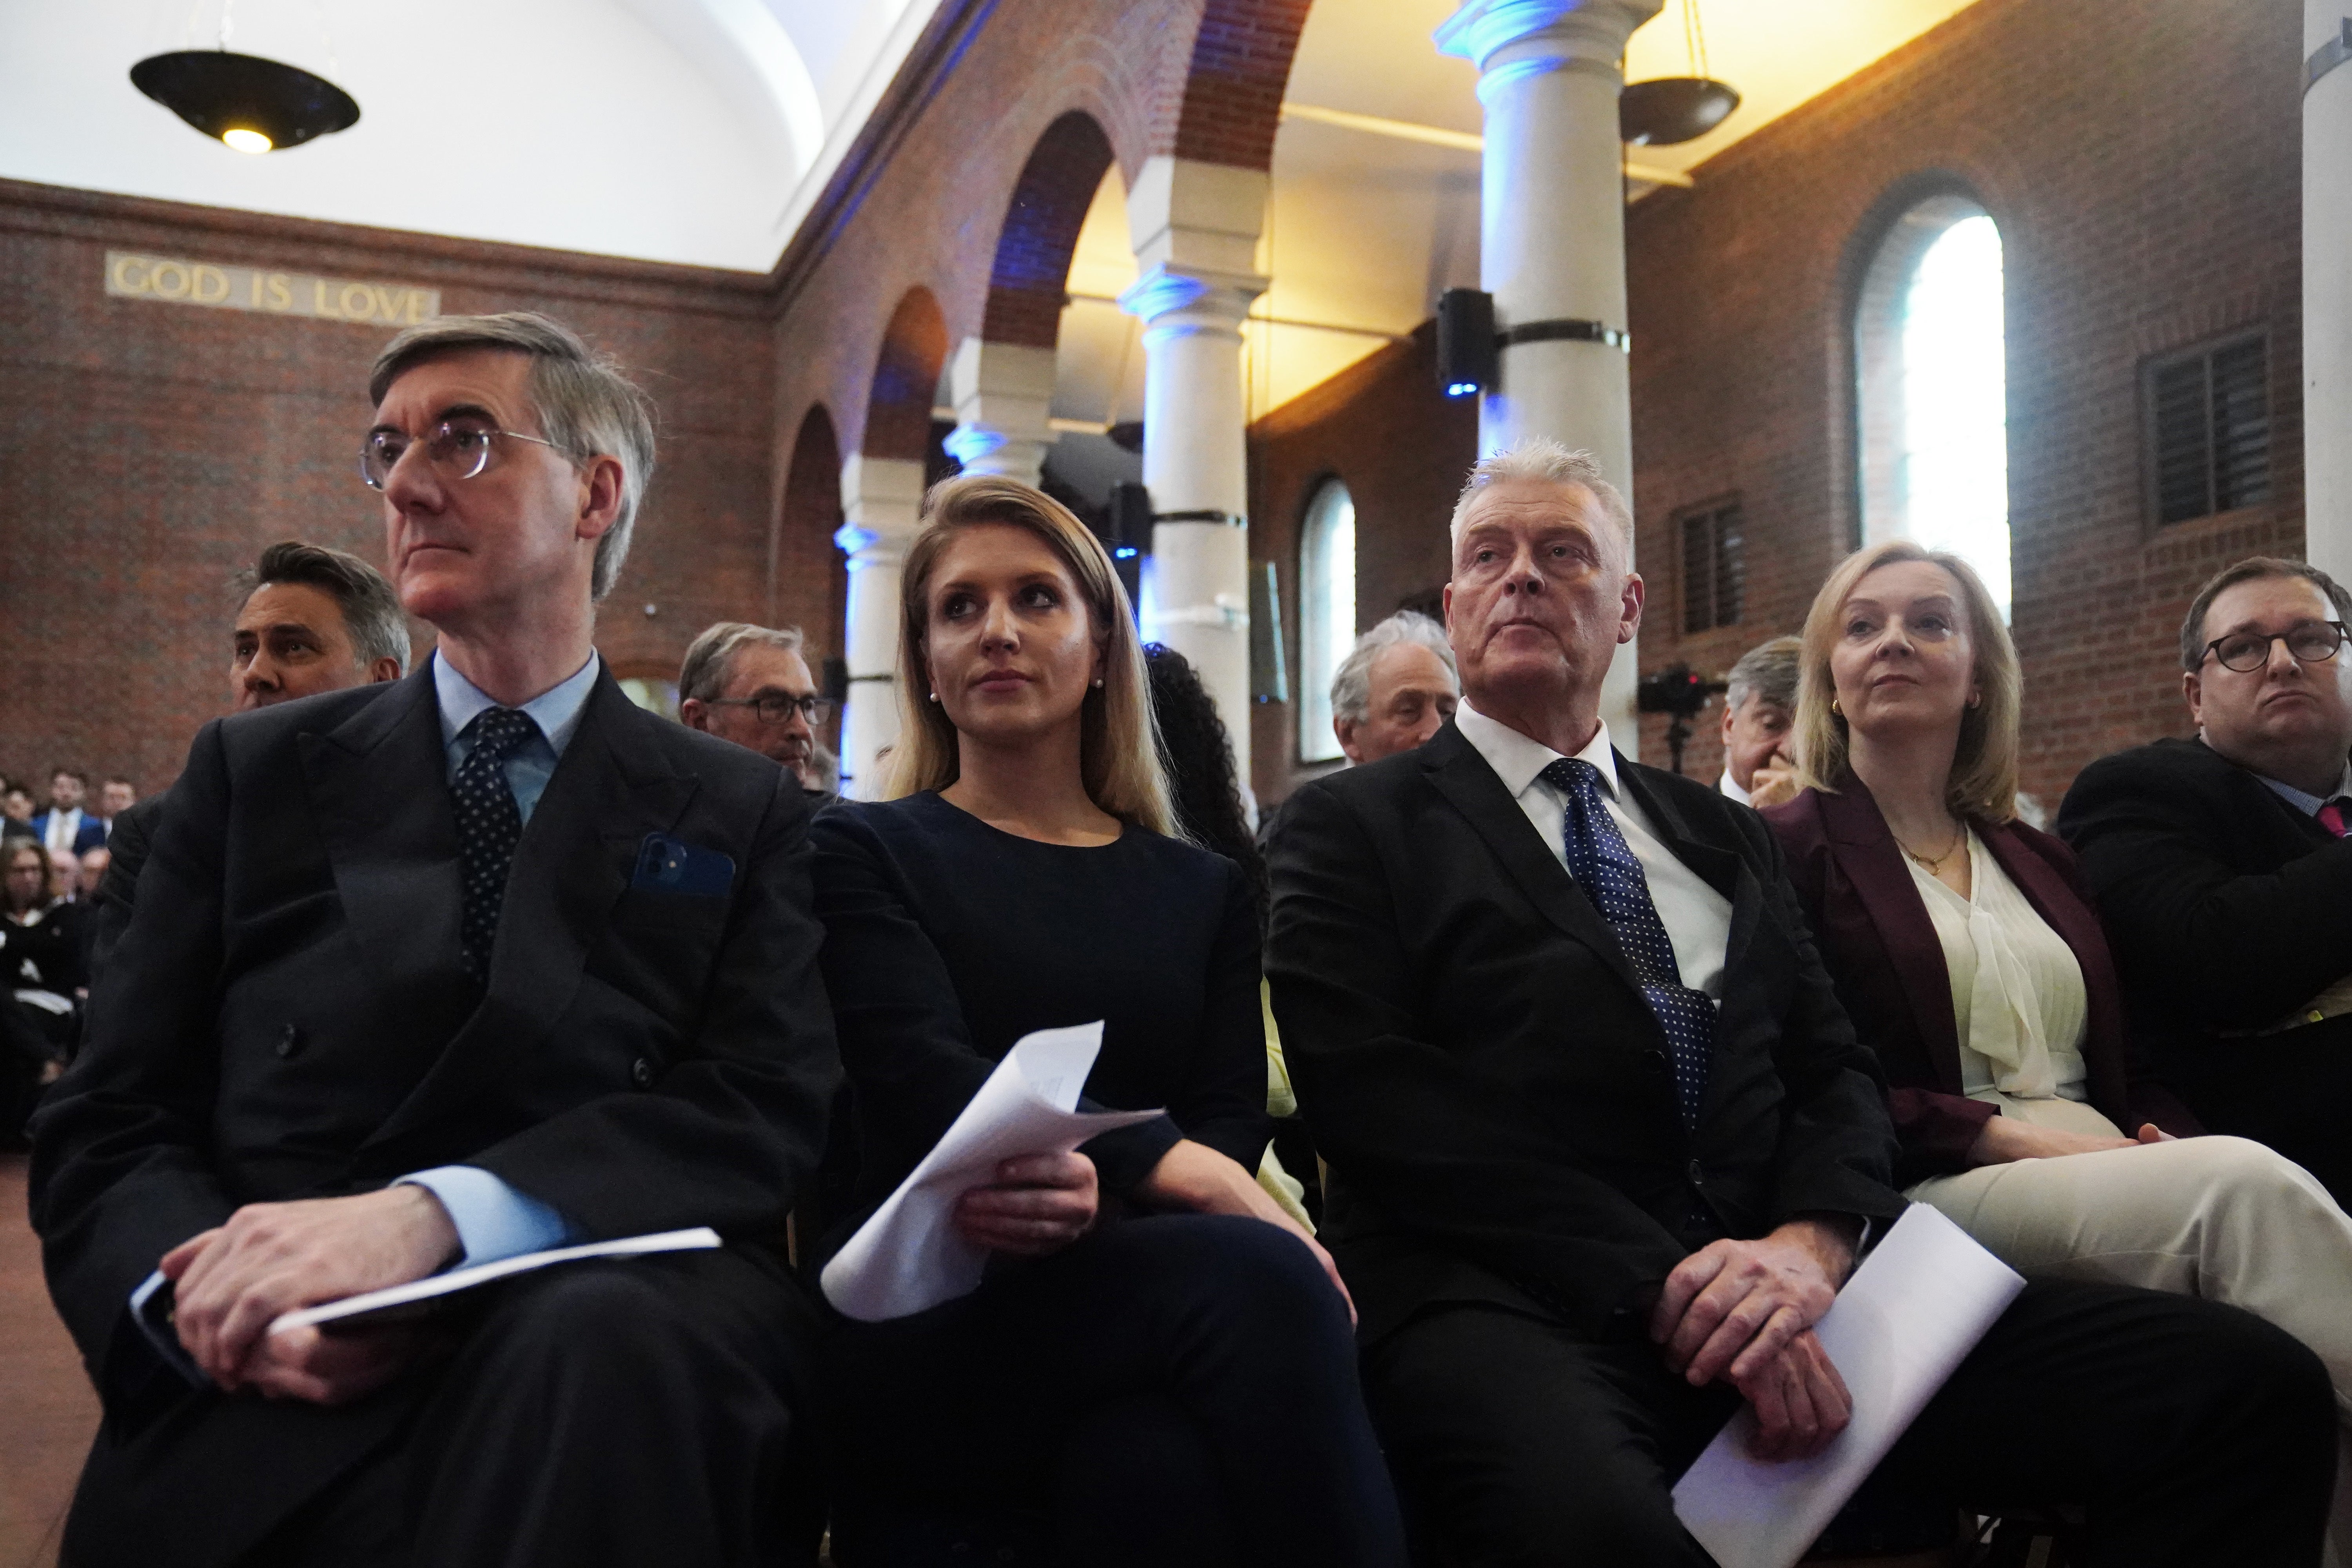 Sir Jacob Rees-Mogg, Mhairi Fraser, Lee Anderson and Liz Truss at the launch